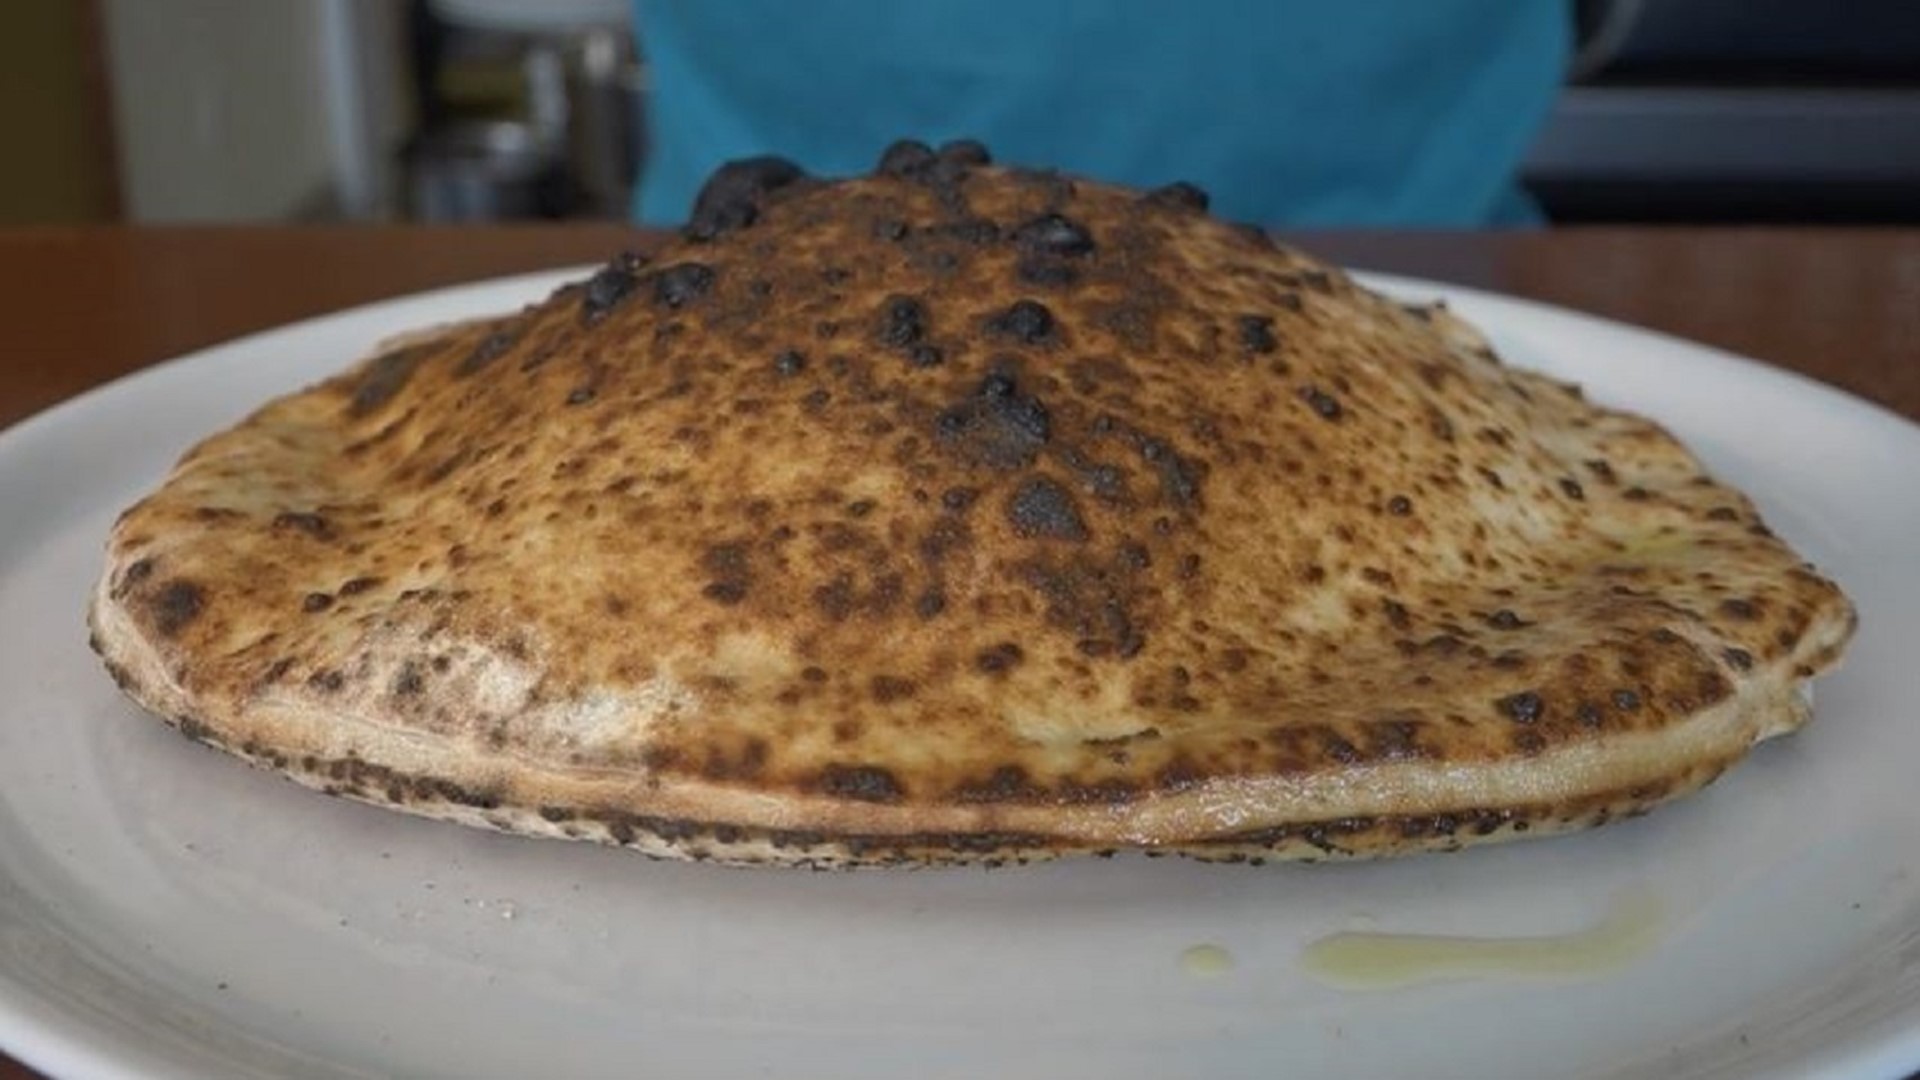 The so-called "pizza bomb" is made in Tampa, cooked in an oven shipped here from Italy.